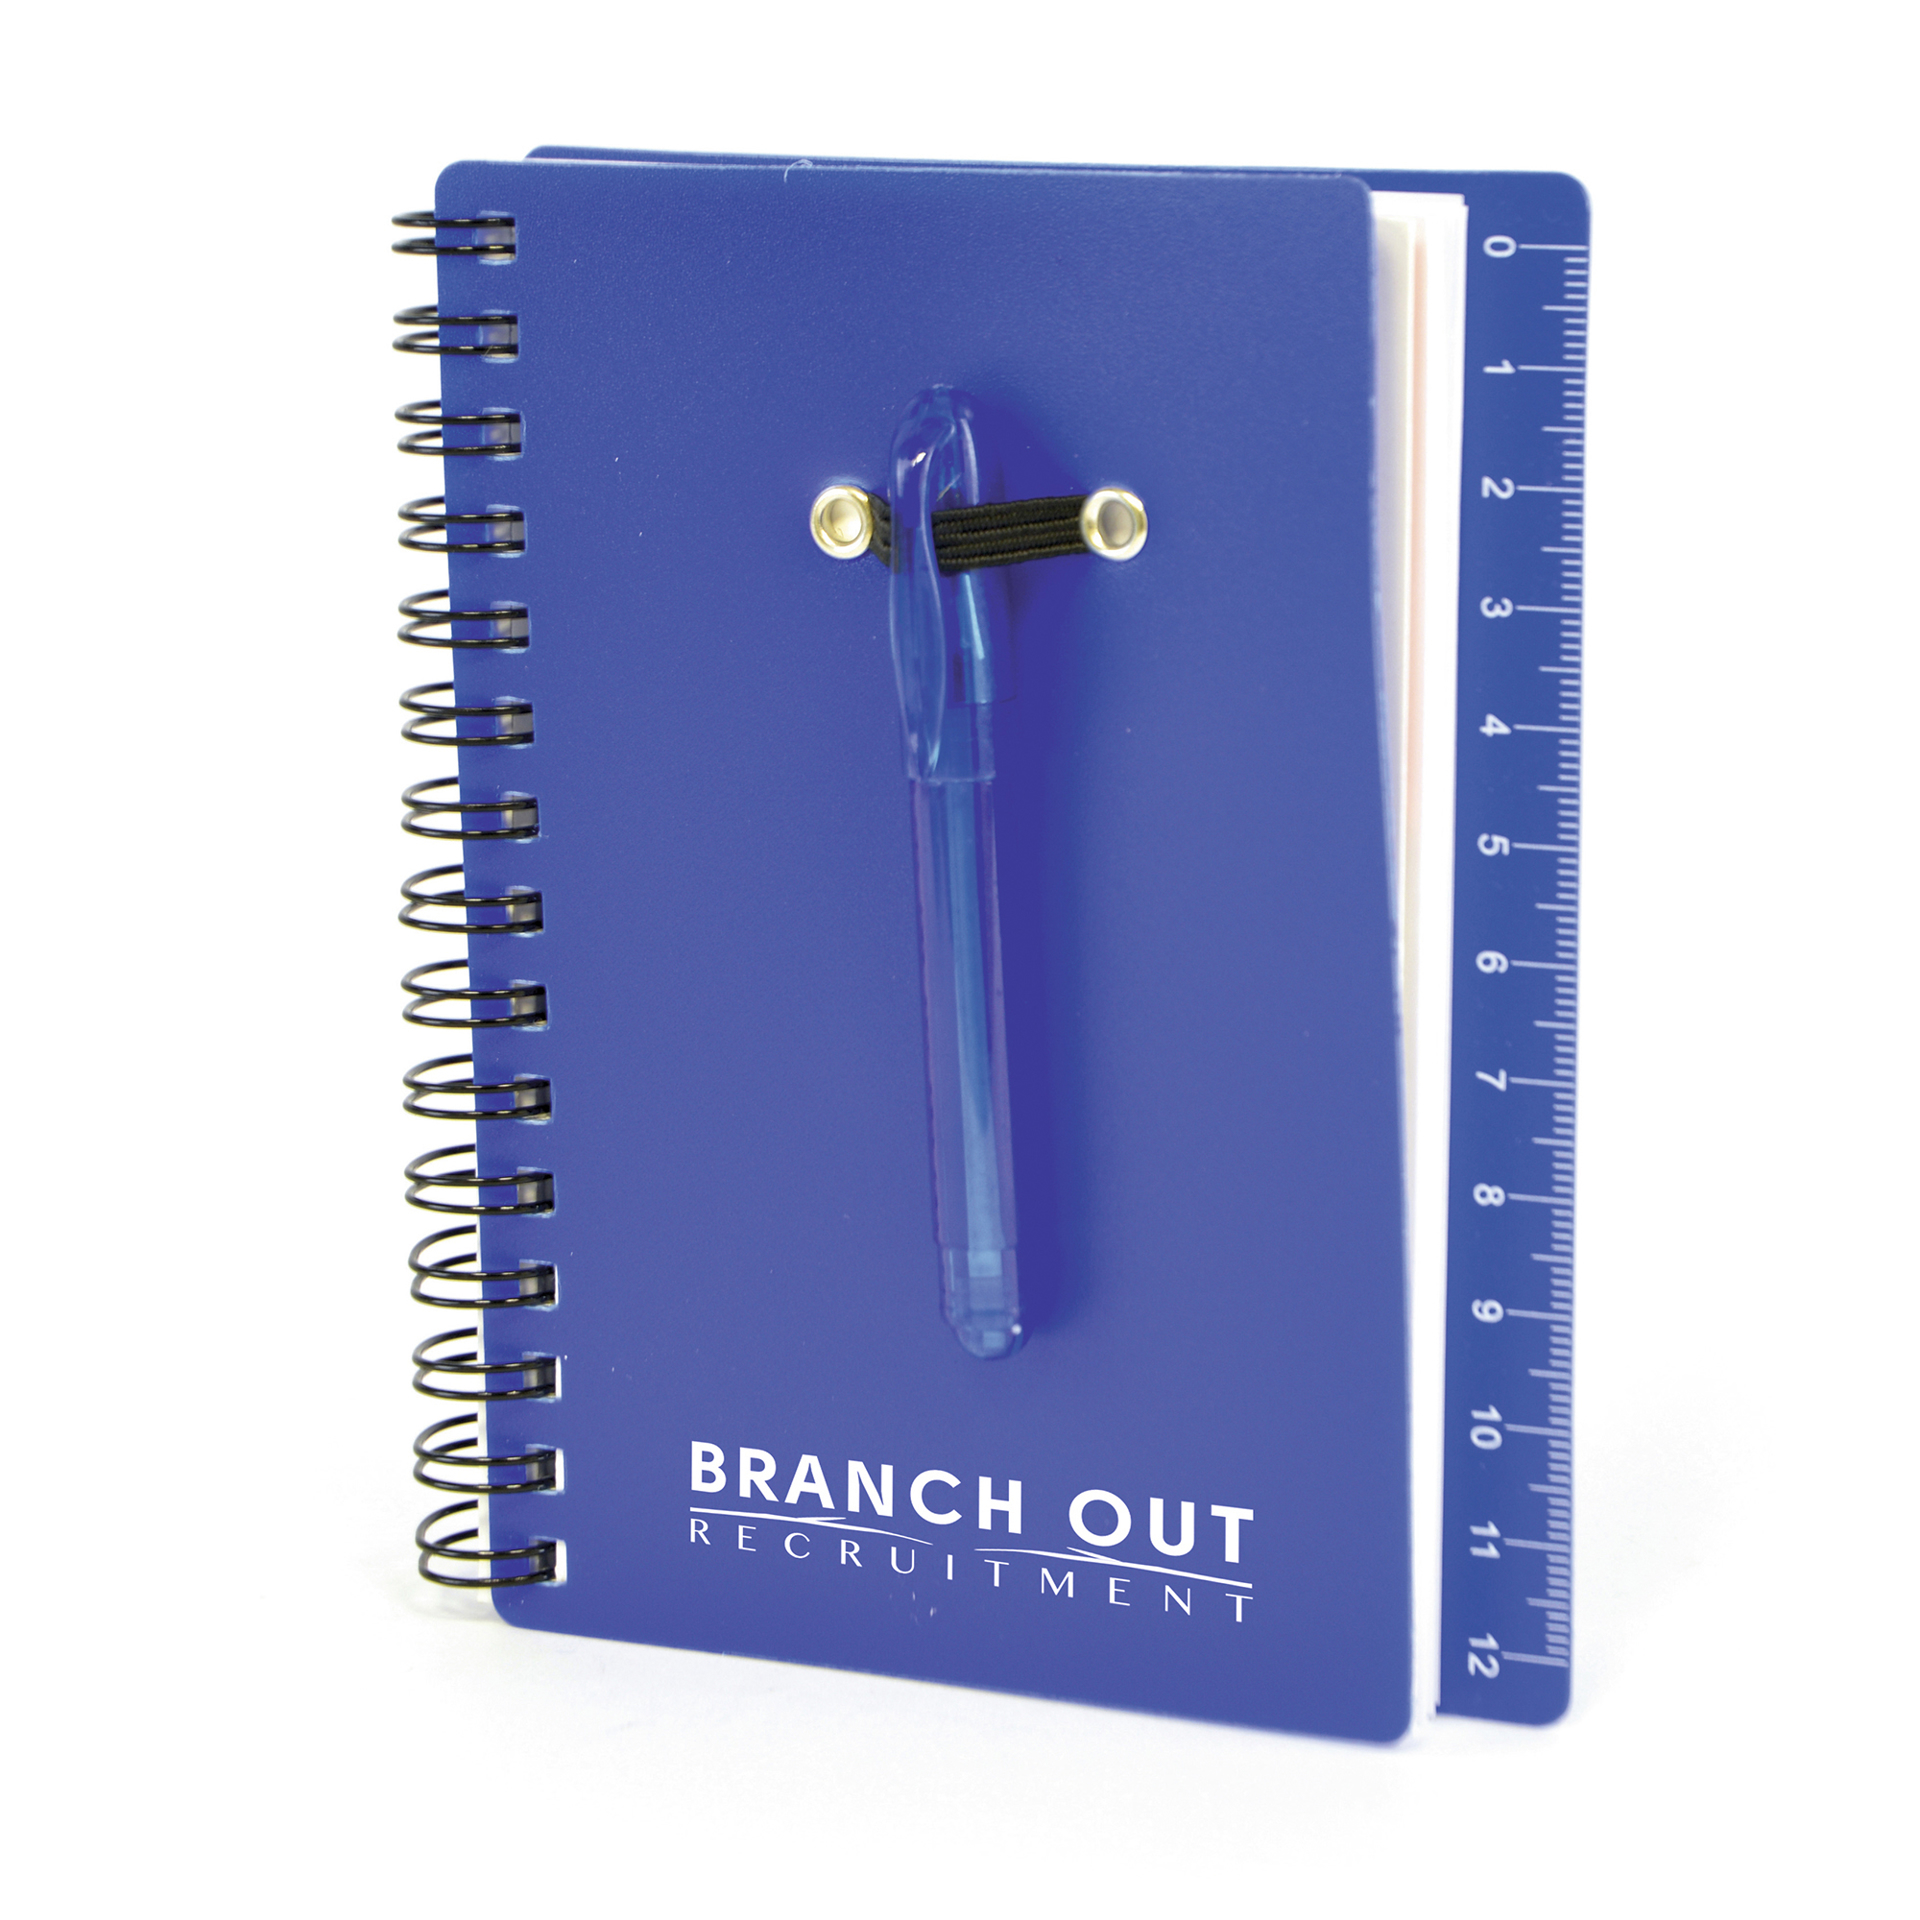 Spiral bound flexible dark blue plastic covered notebook with matching ball pen with back cover ruler